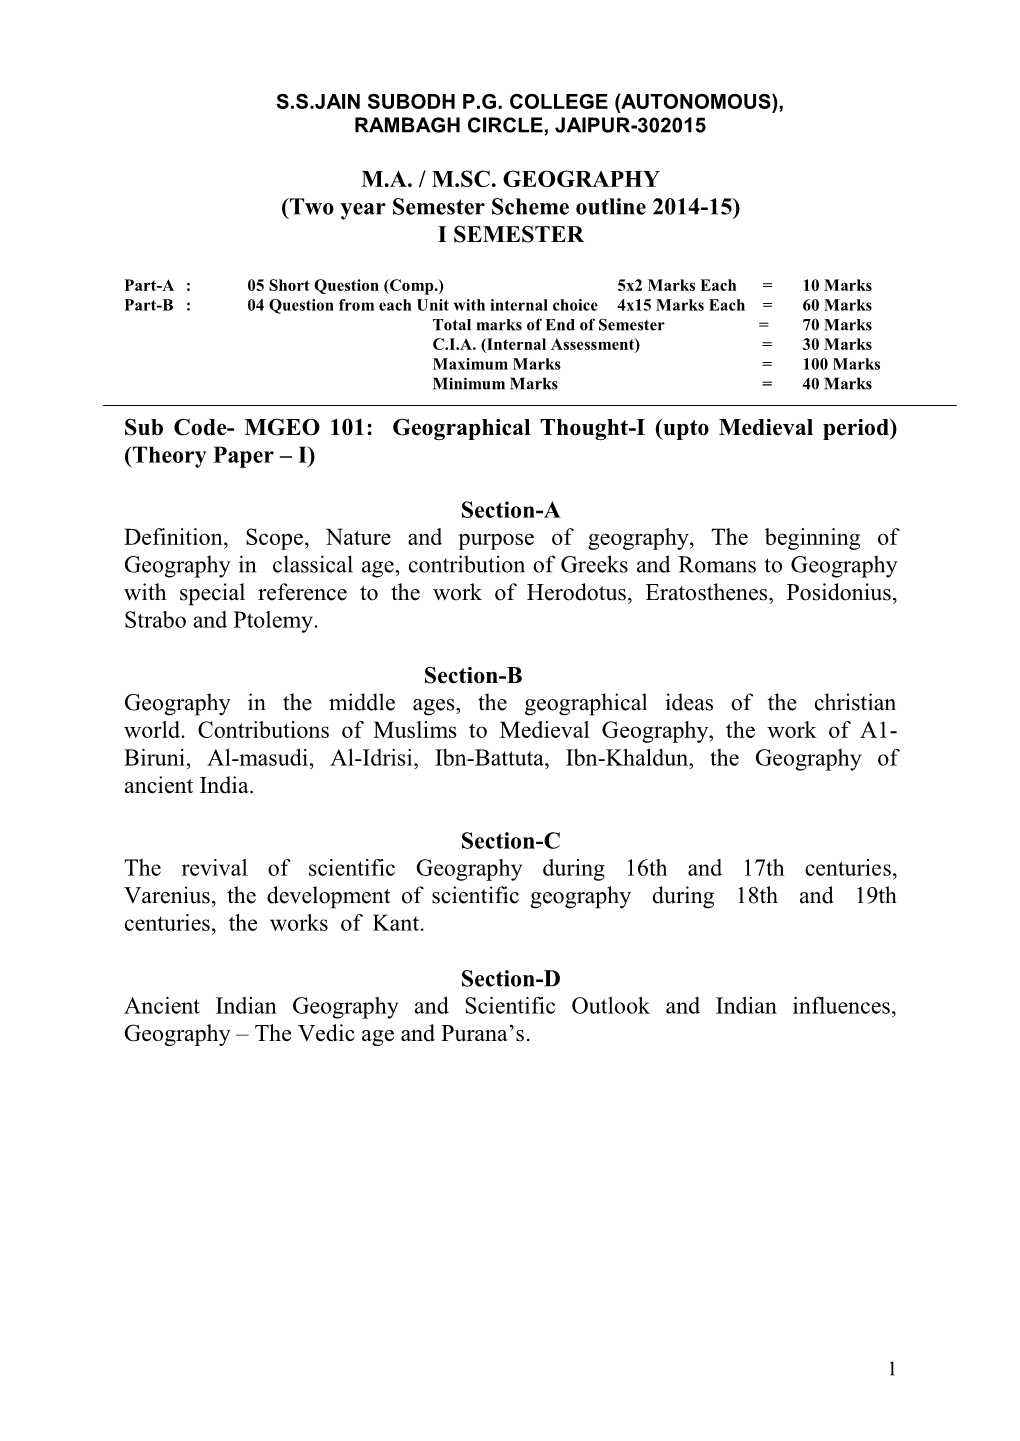 MA / M.SC. GEOGRAPHY (Two Year Semester Scheme Outline 2014-15)